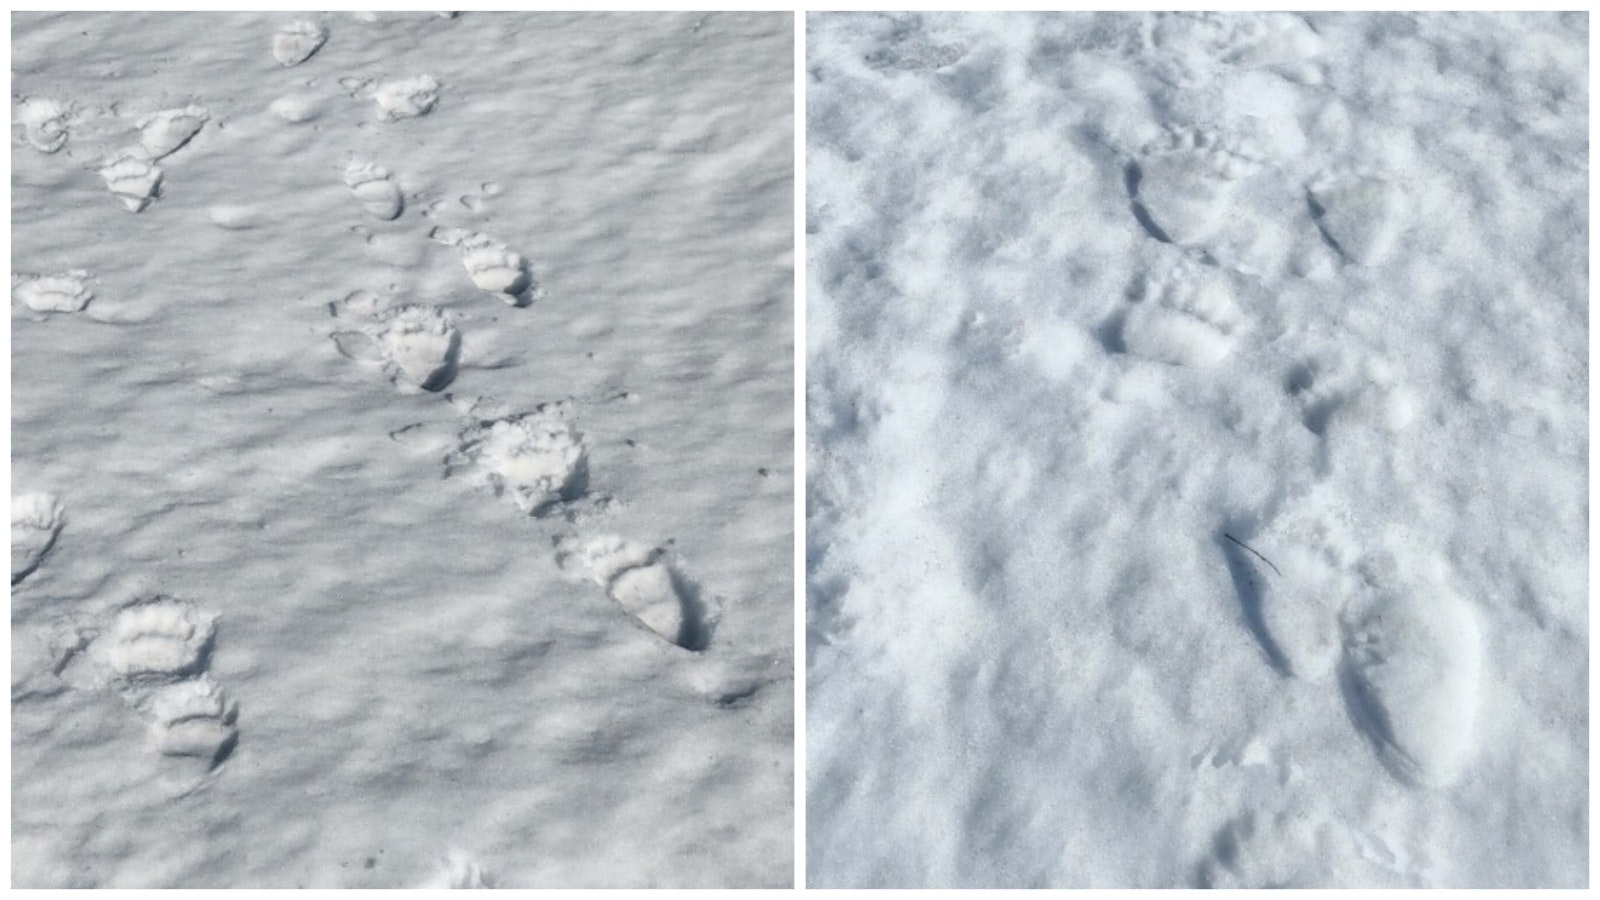 Longtime Wyoming wildlife photographer Jorn Vangoidtsenhoven talked to someone who saw Grizzly 399 and her cub Sunday, and photographed their tracks Monday morning.